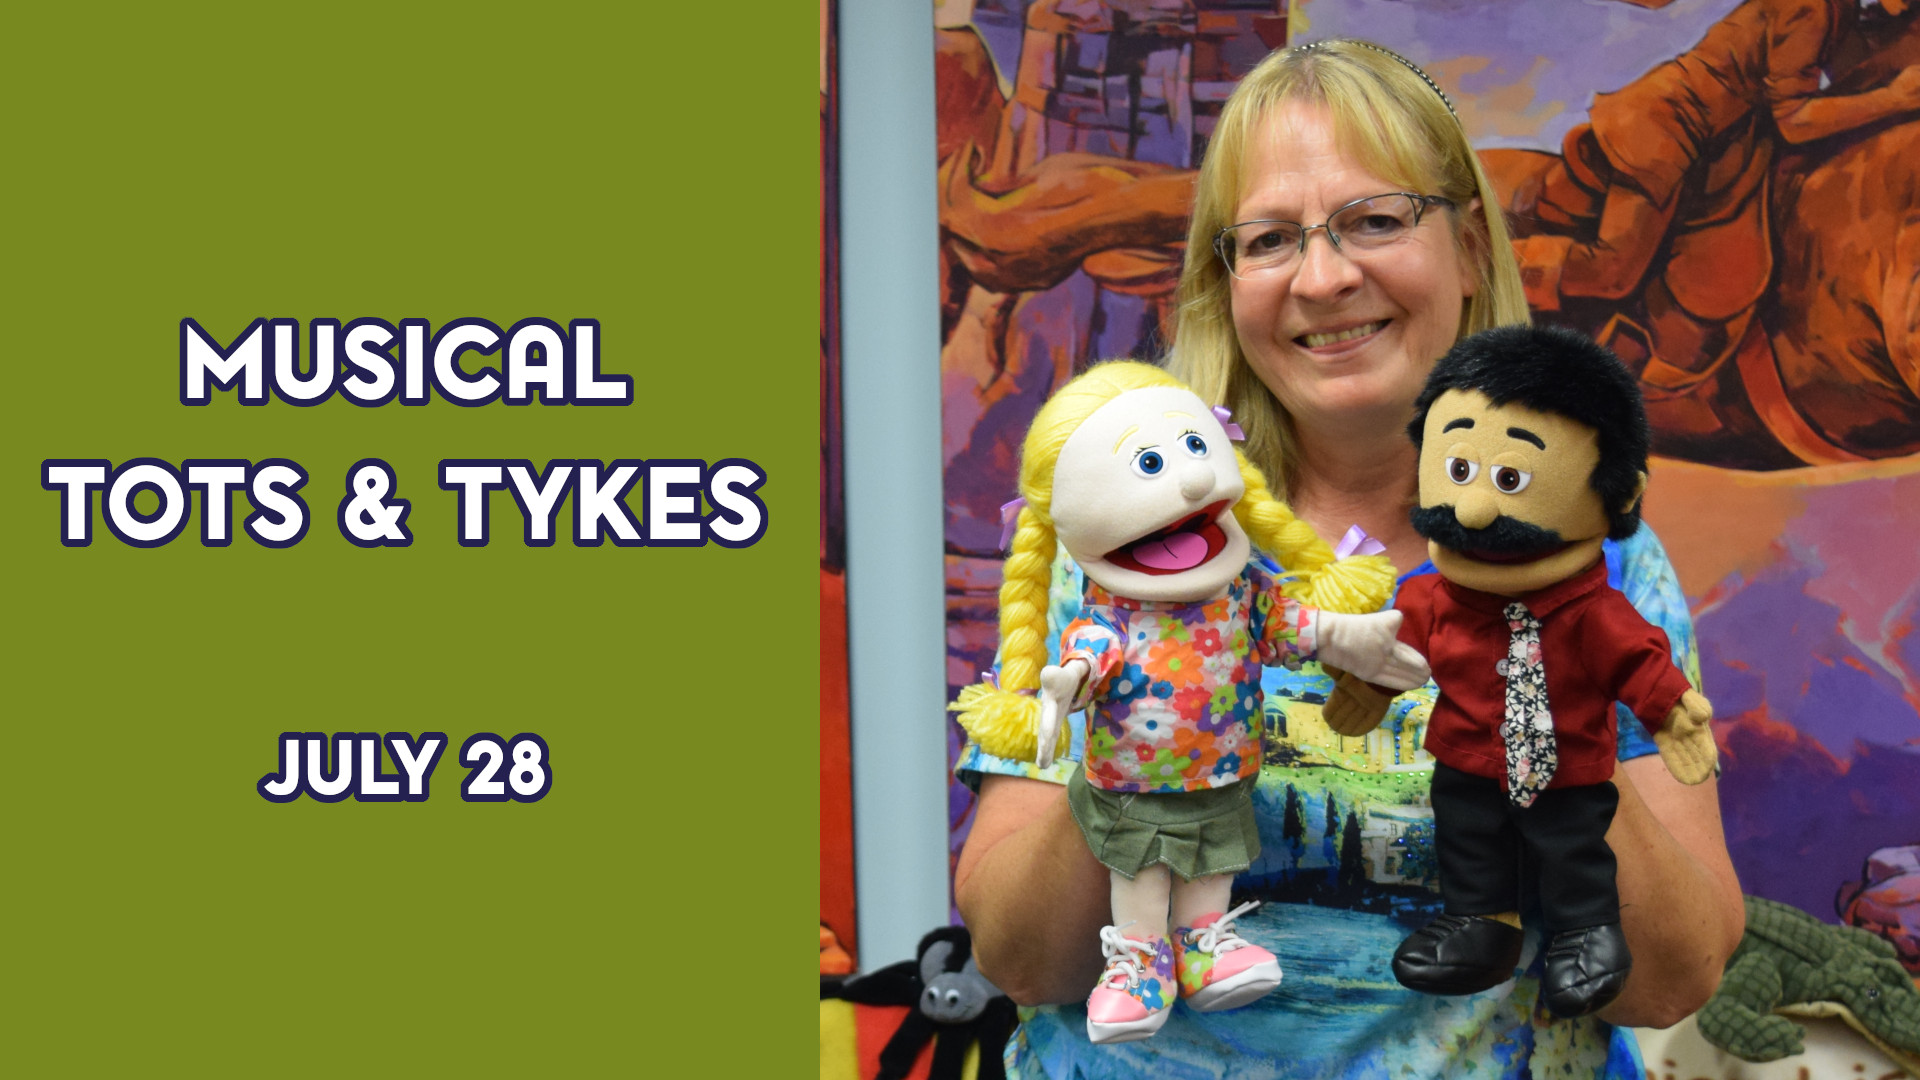 A woman holds stuffed animals next to the text "Musical Tots & Tykes July 28"